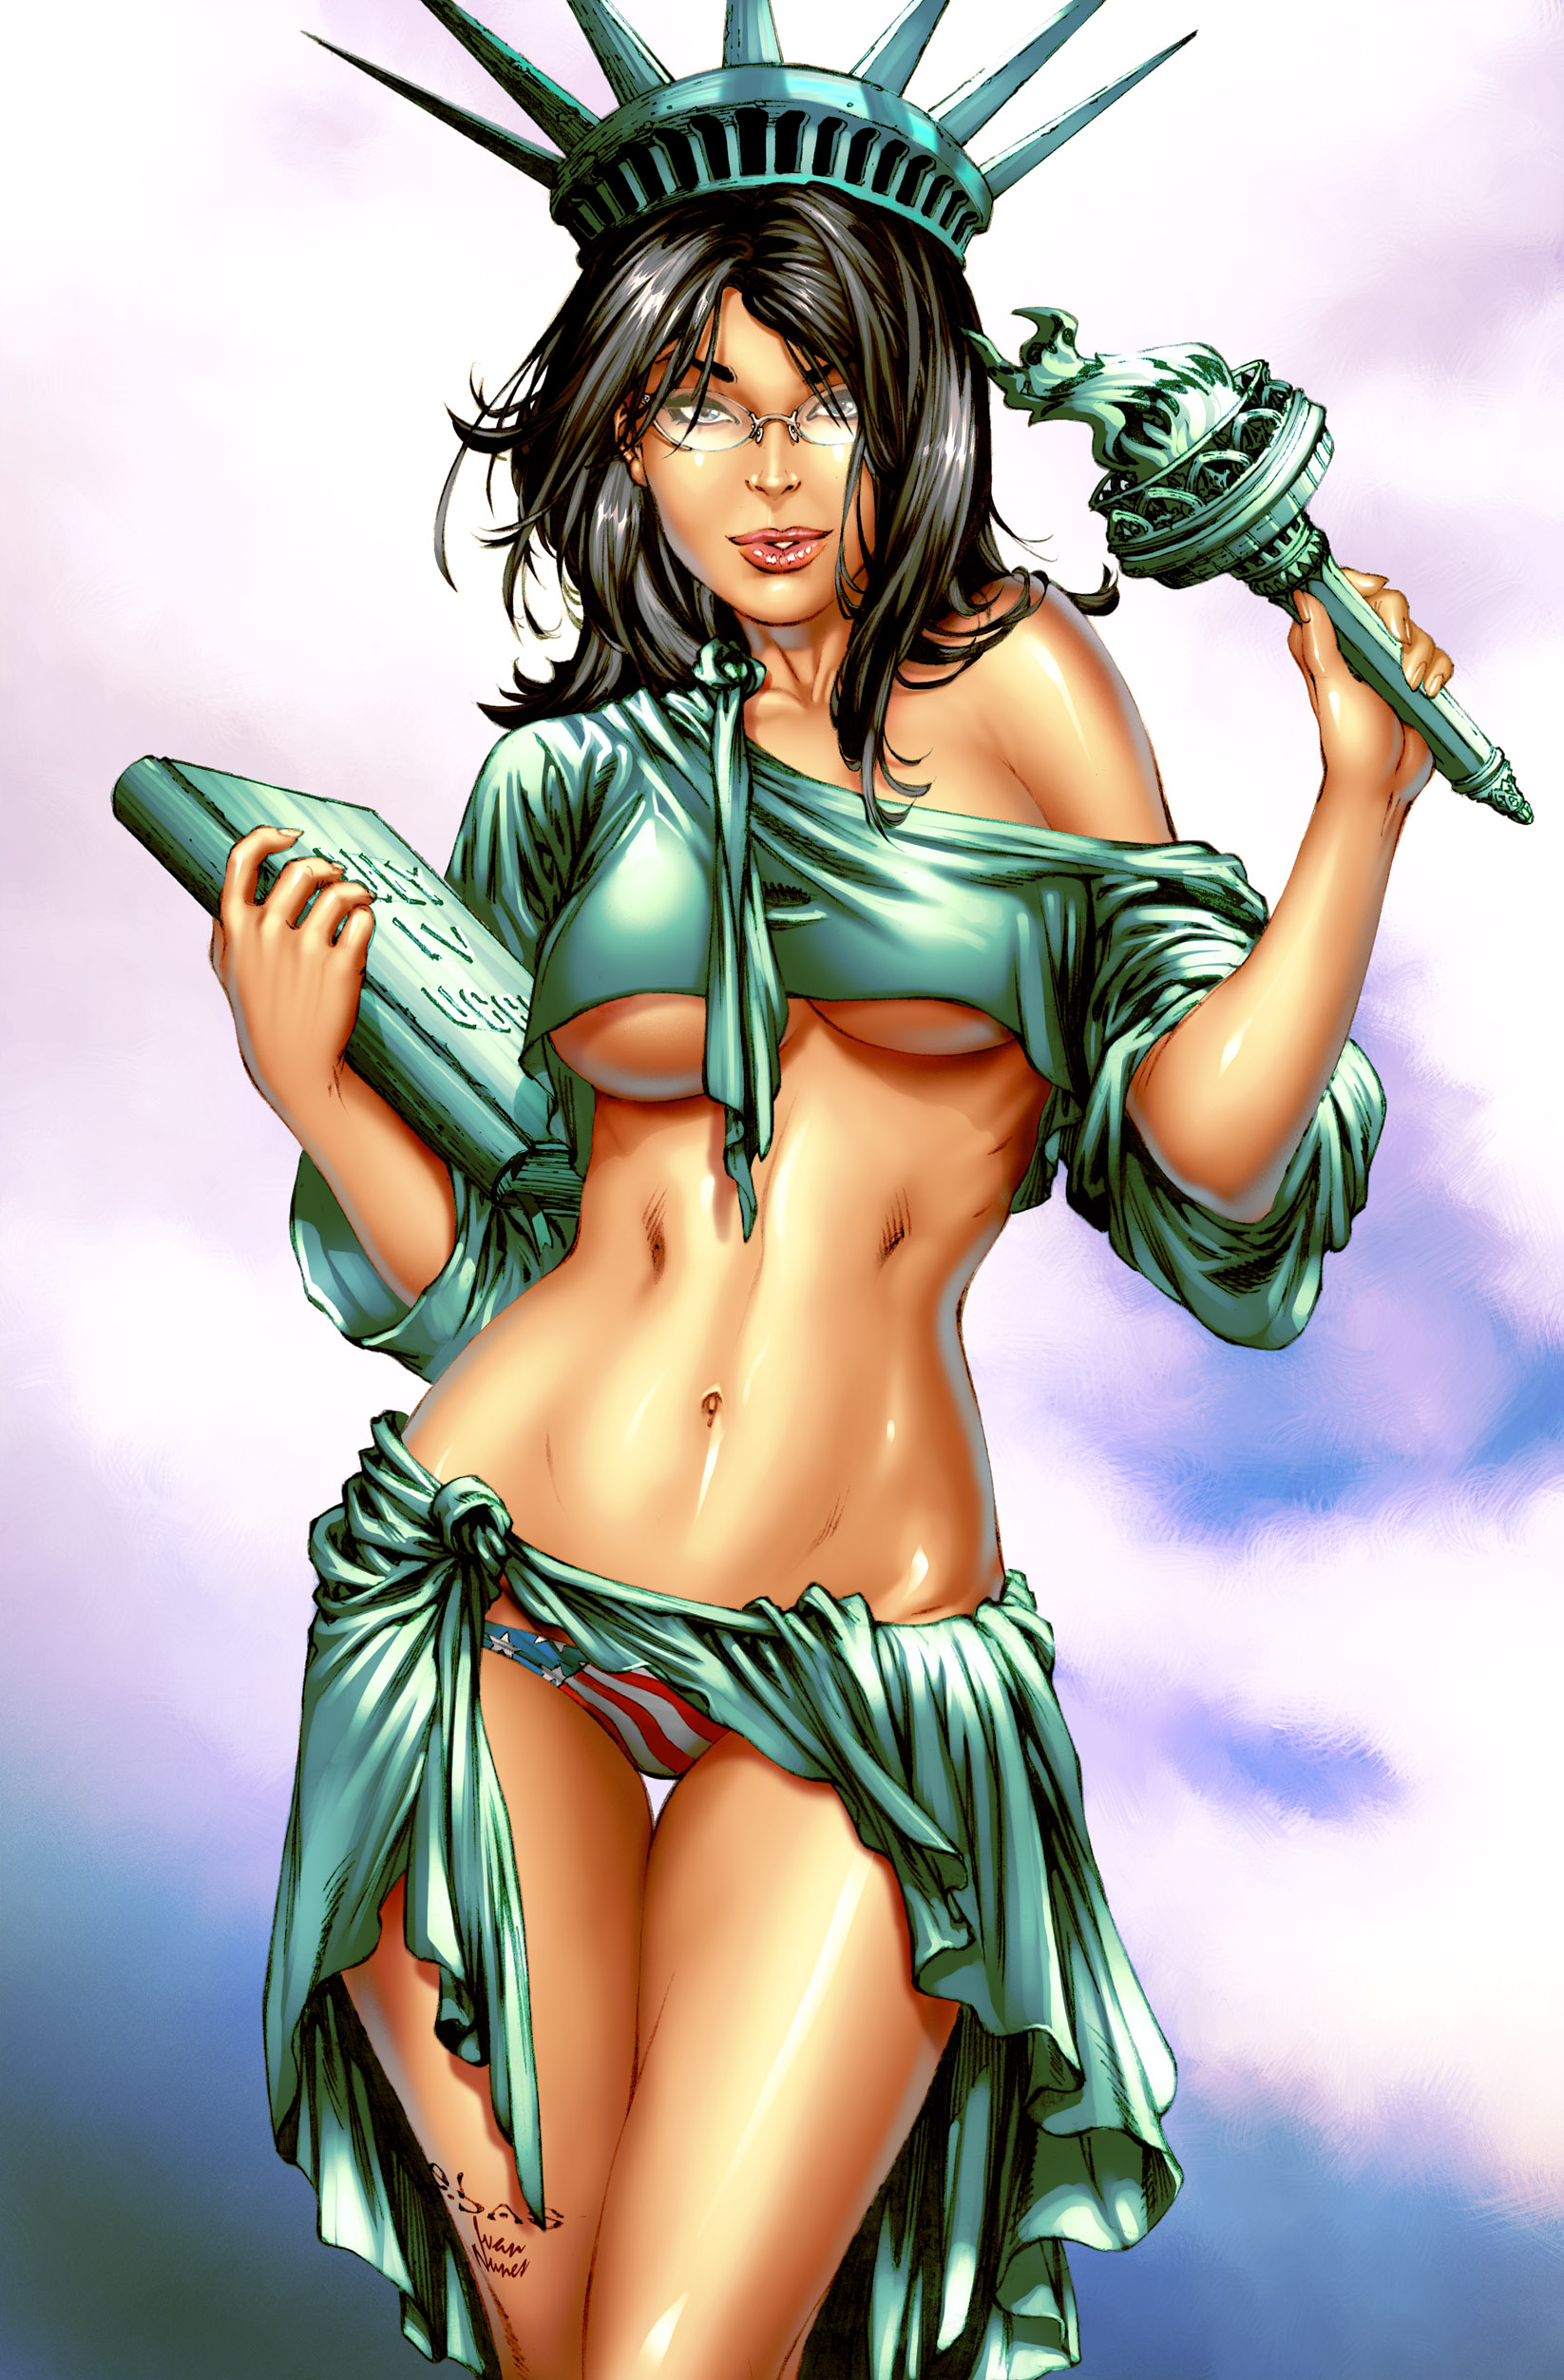 Images of Grimm Fairy Tales 1646x2504. 